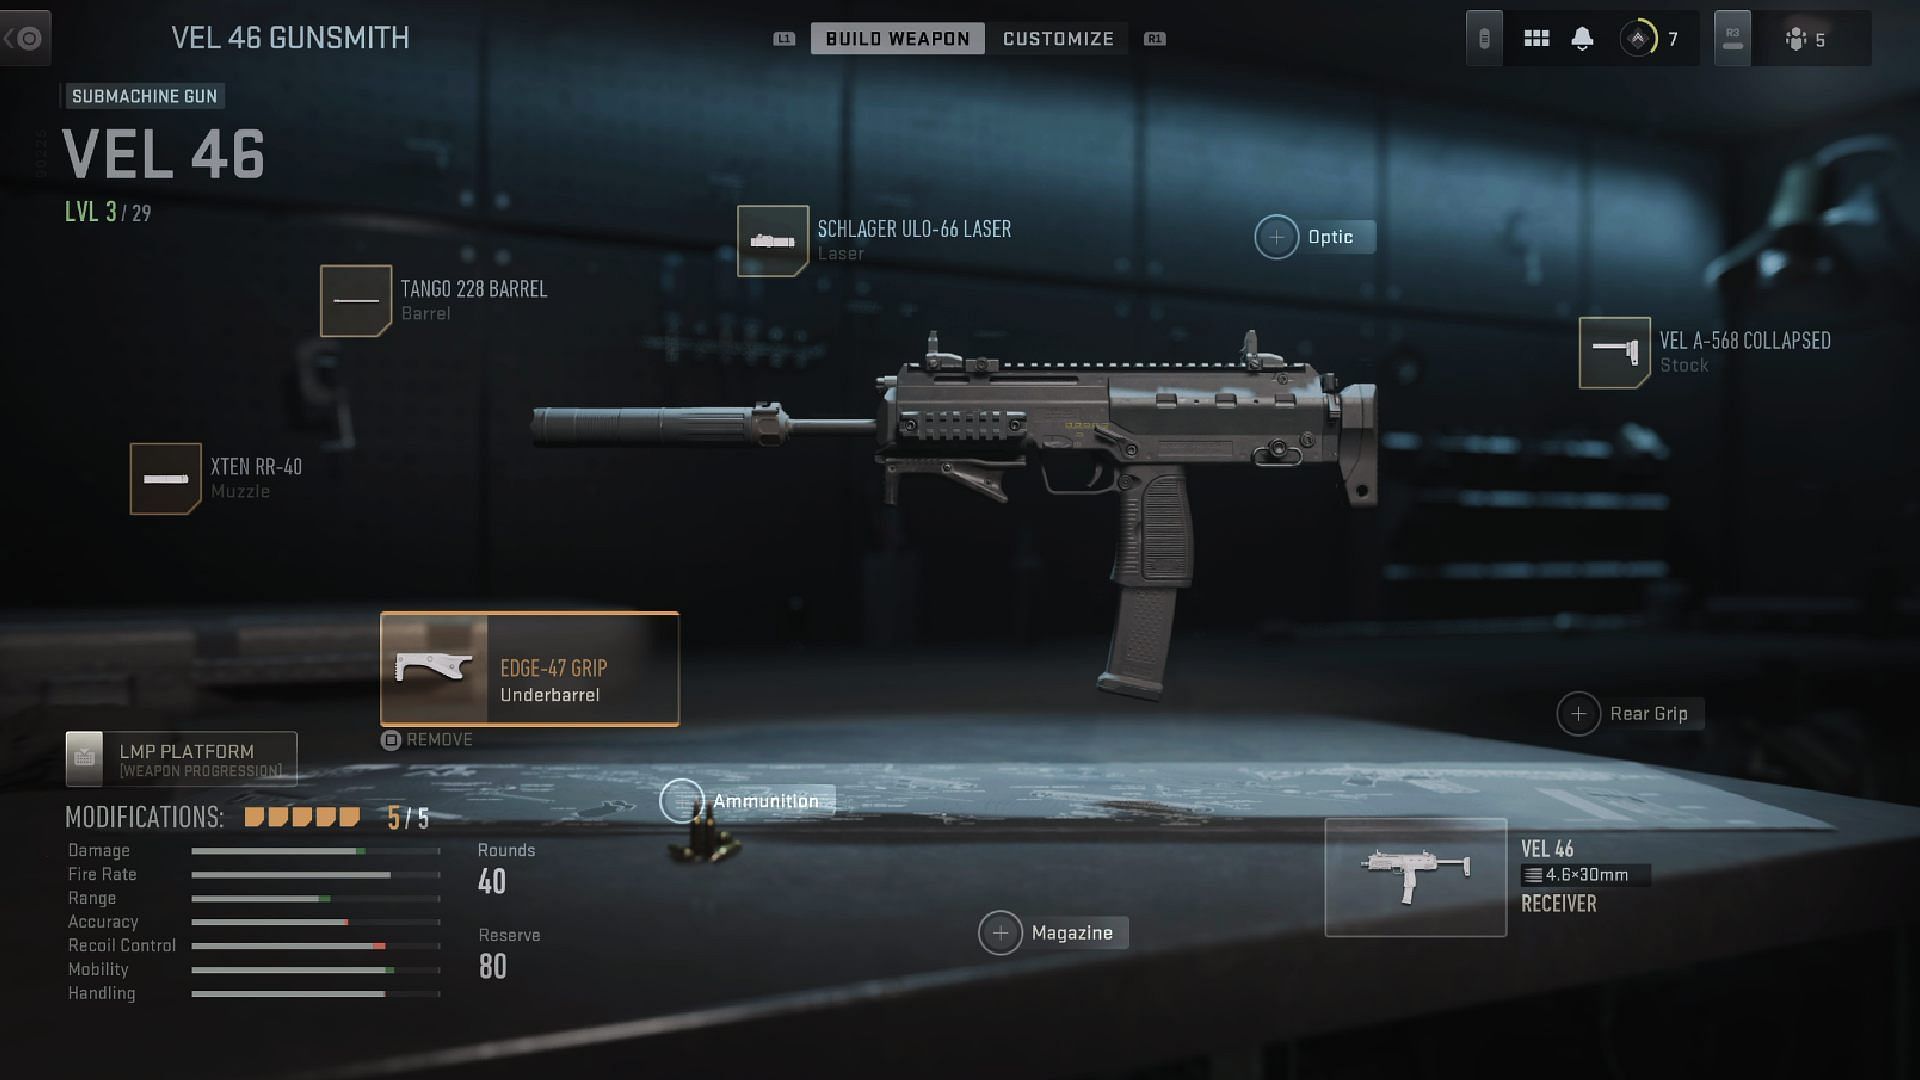 VEL 46 loadout in MW2 (Image via Activision)